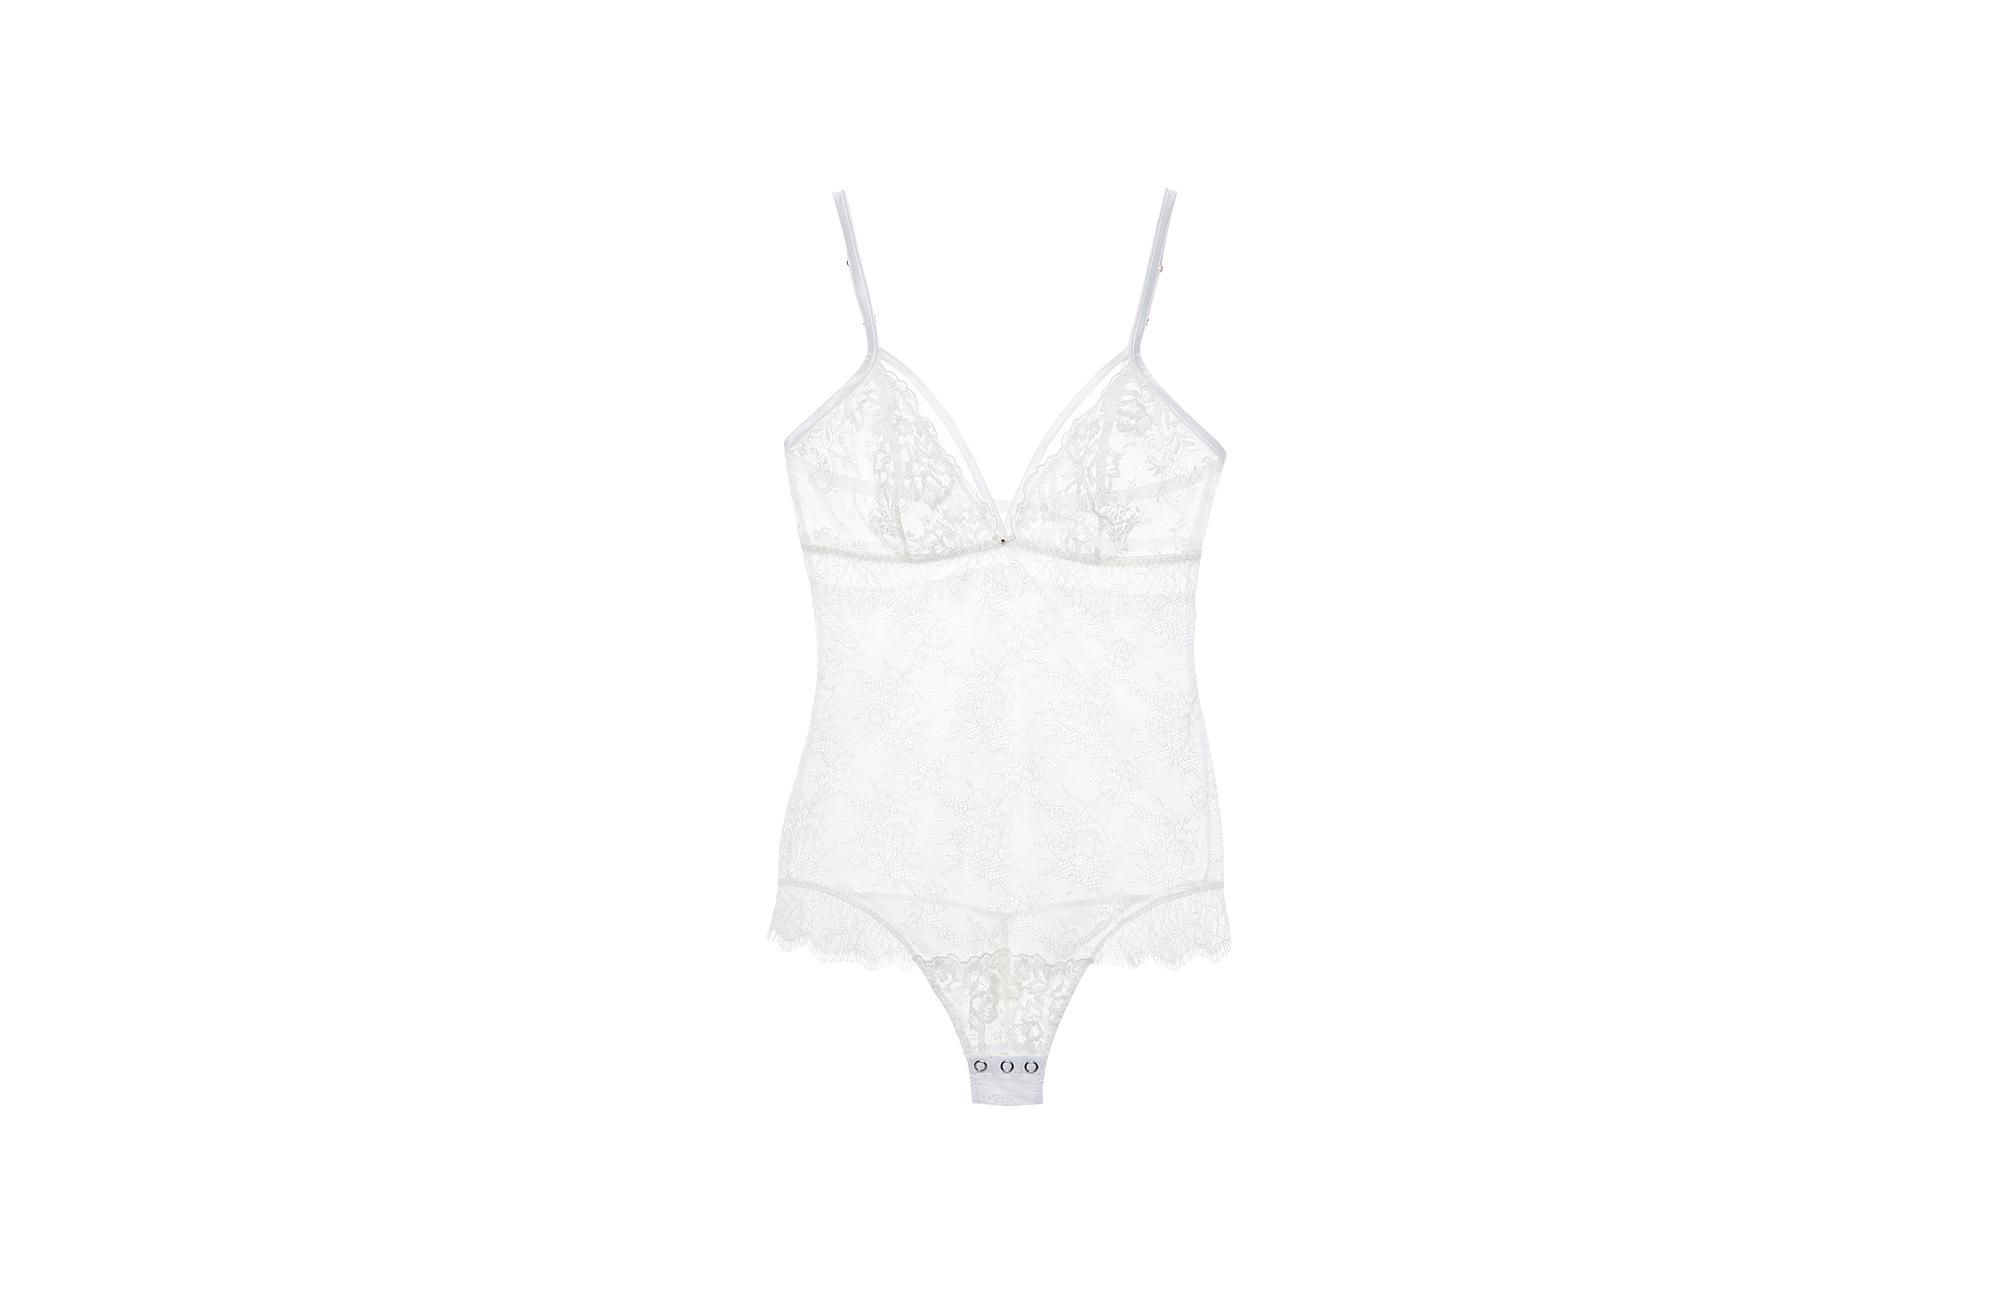 where to buy well-made lingerie for under $100